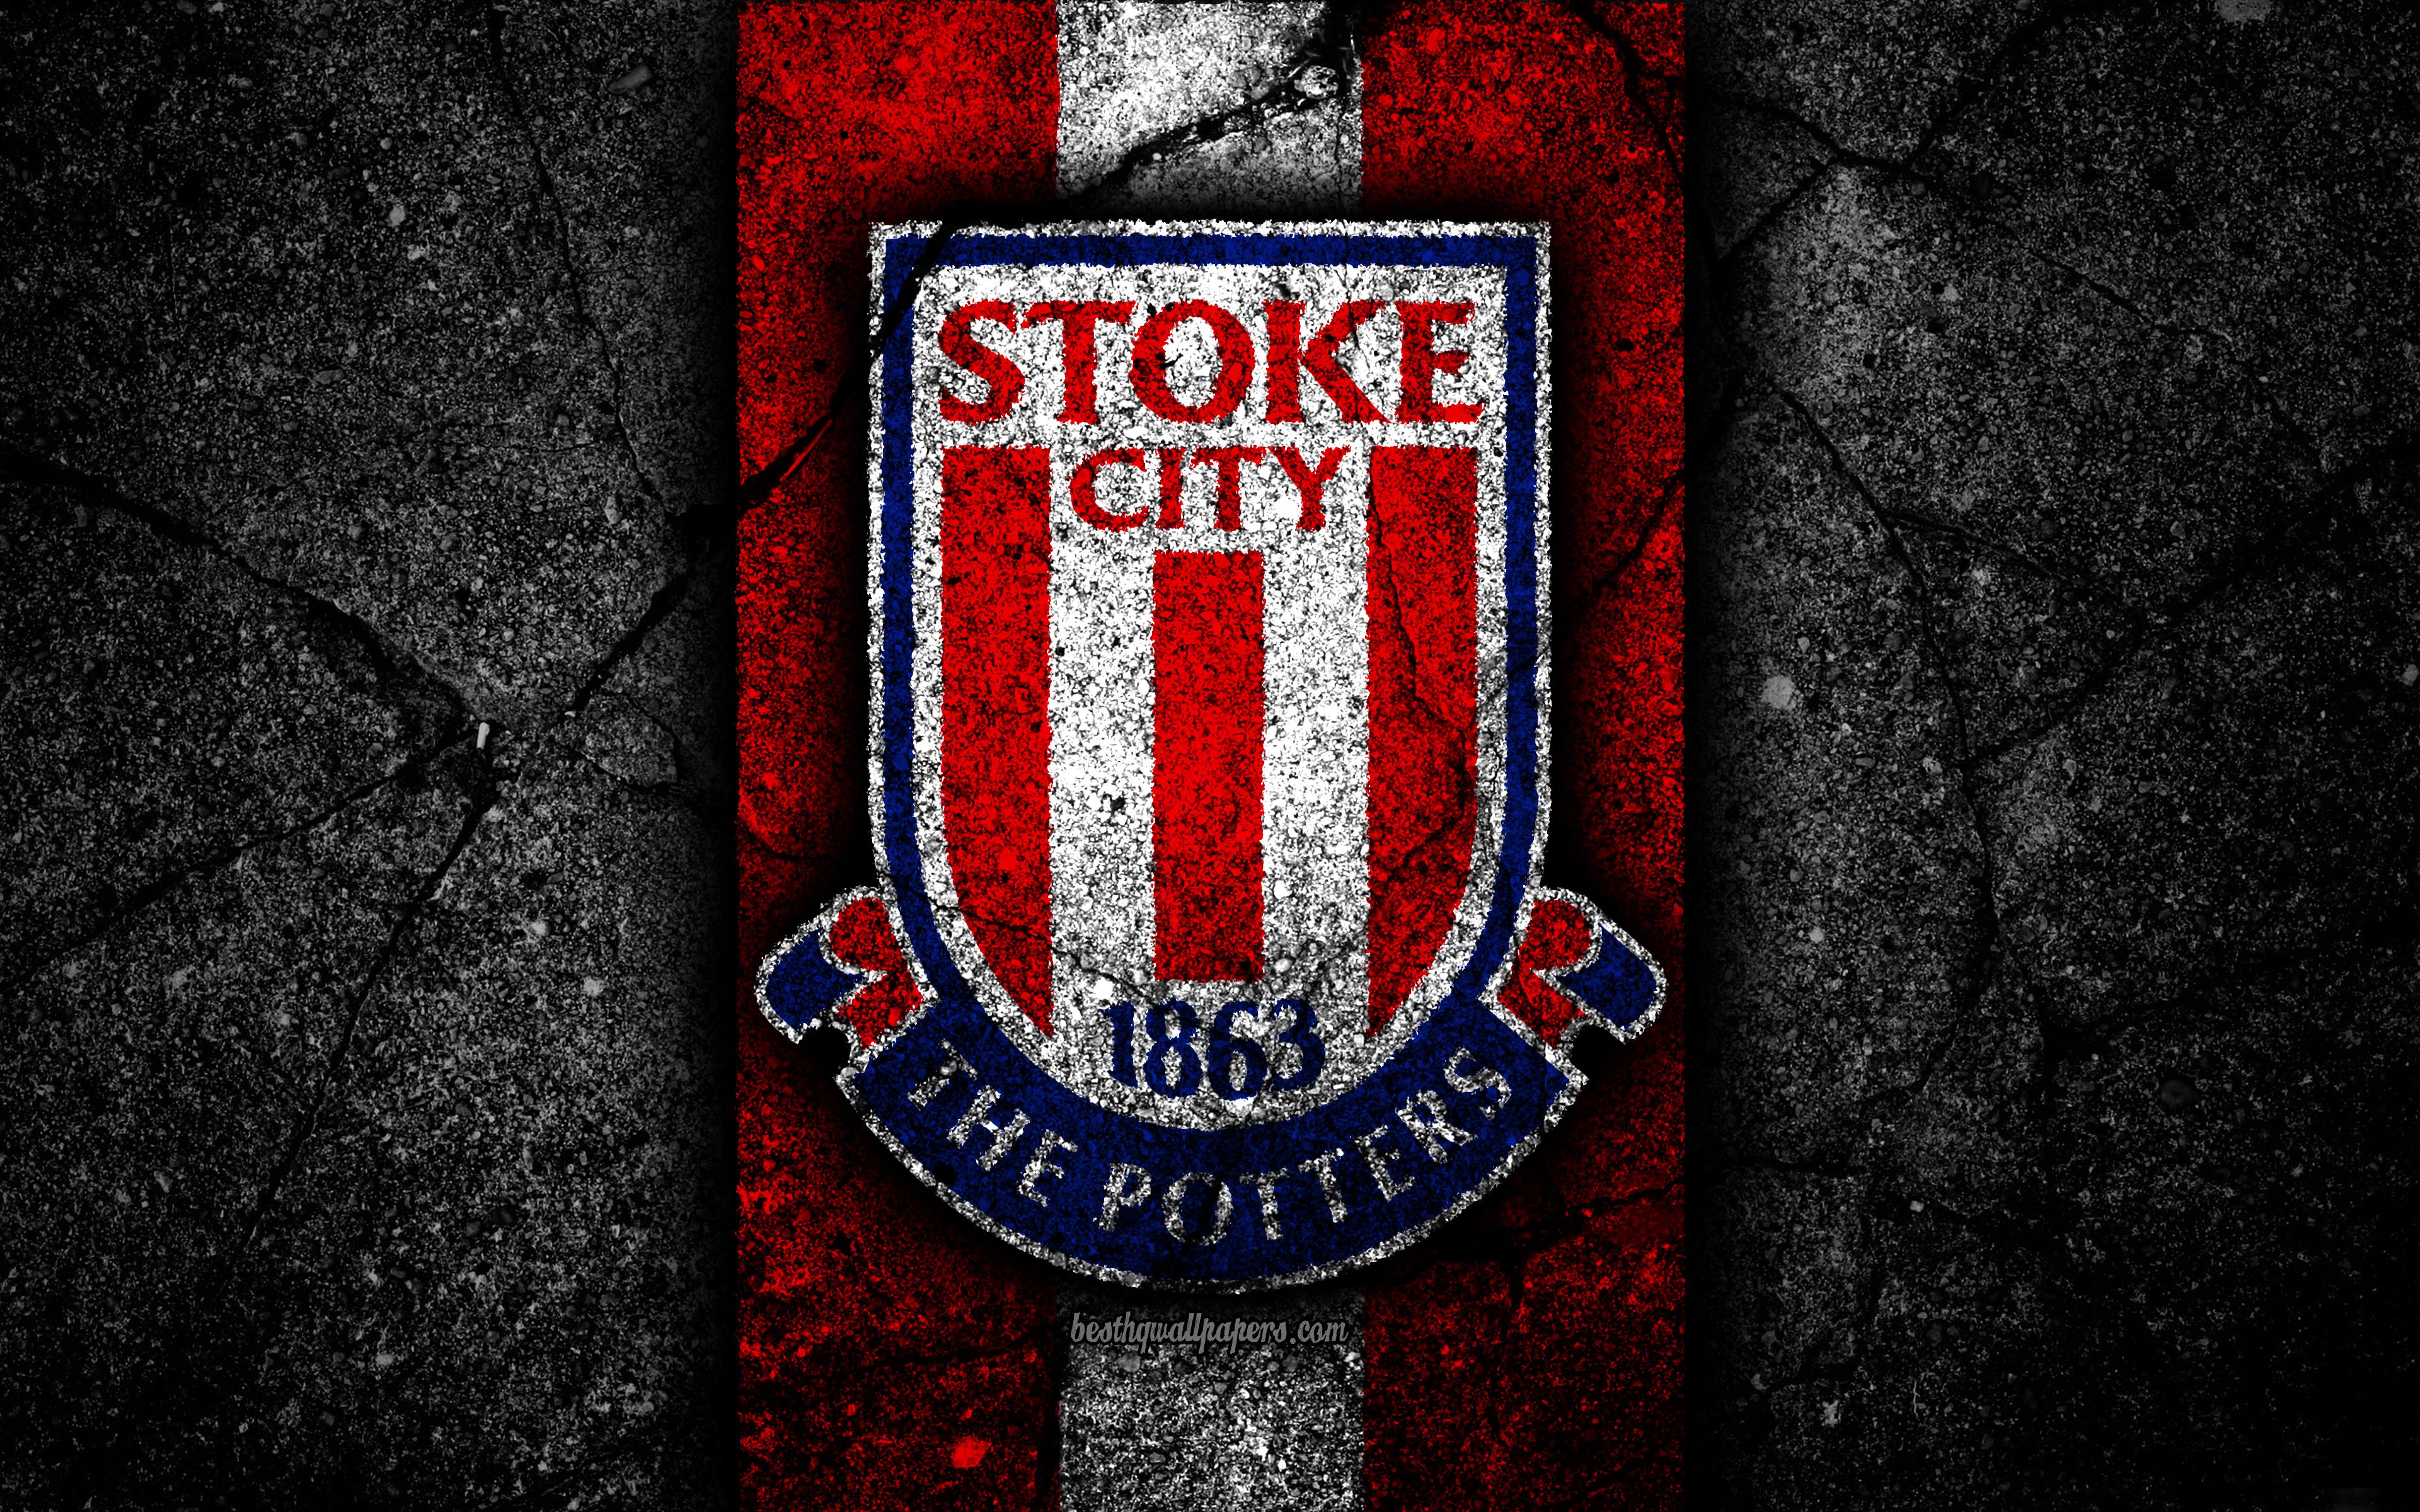 Stoke City F.c. Wallpapers - Wallpaper Cave